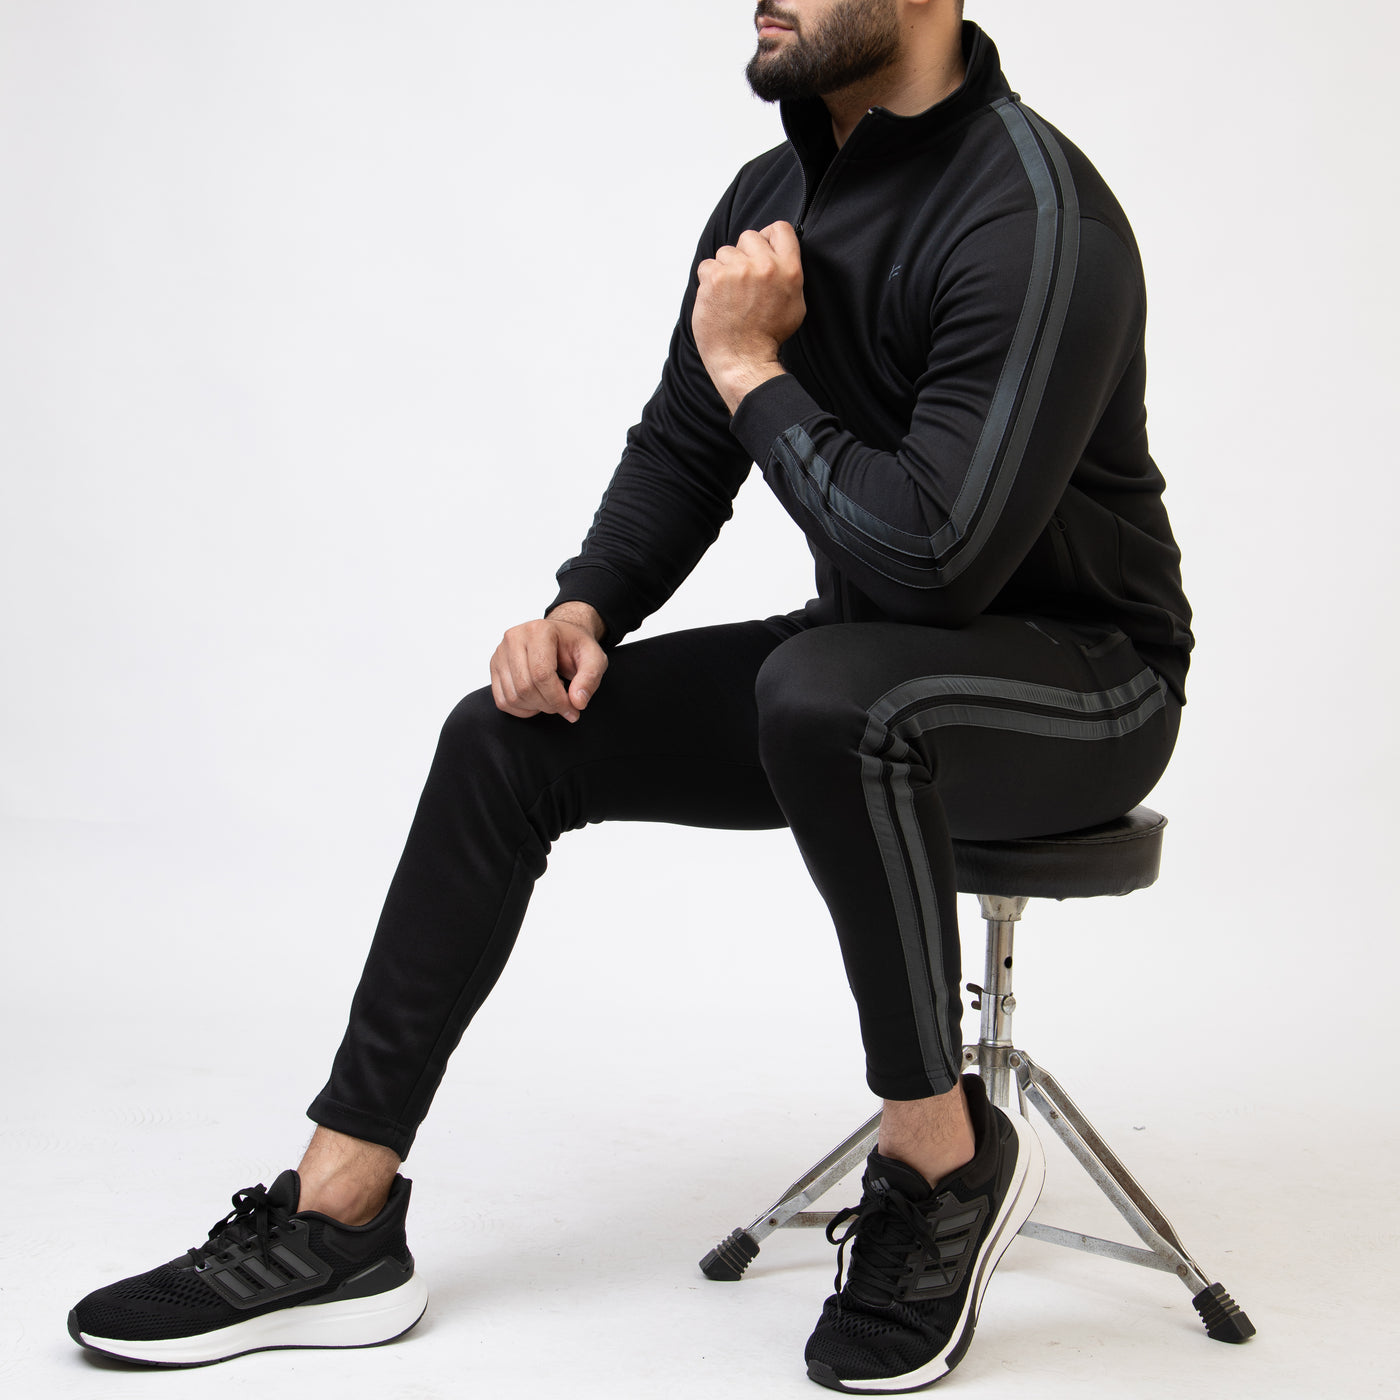 Black Mock-Neck Zipper Tracksuit with Two Gray Stripes